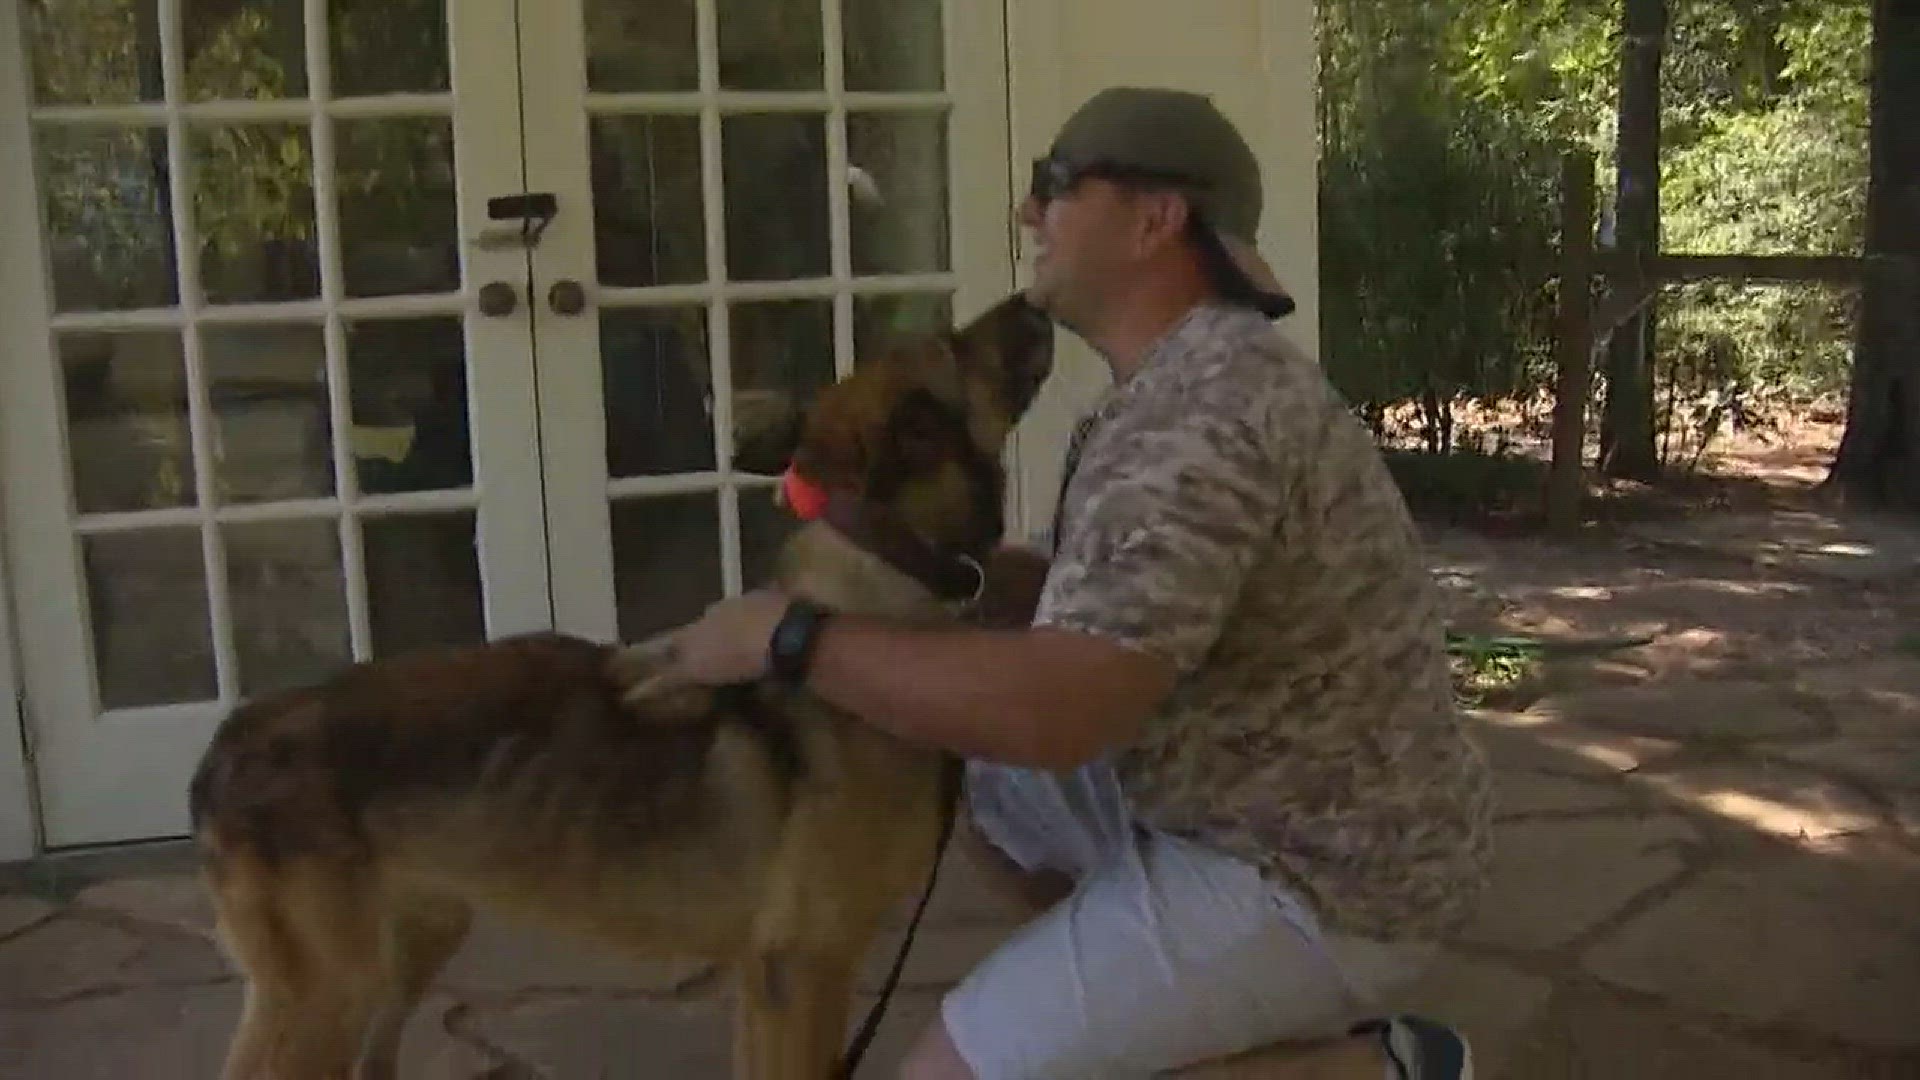 There was an emotional reunion Friday in Montgomery County where a retired U.S. Navy sailor and his service dog saw each other for the first time in three years.